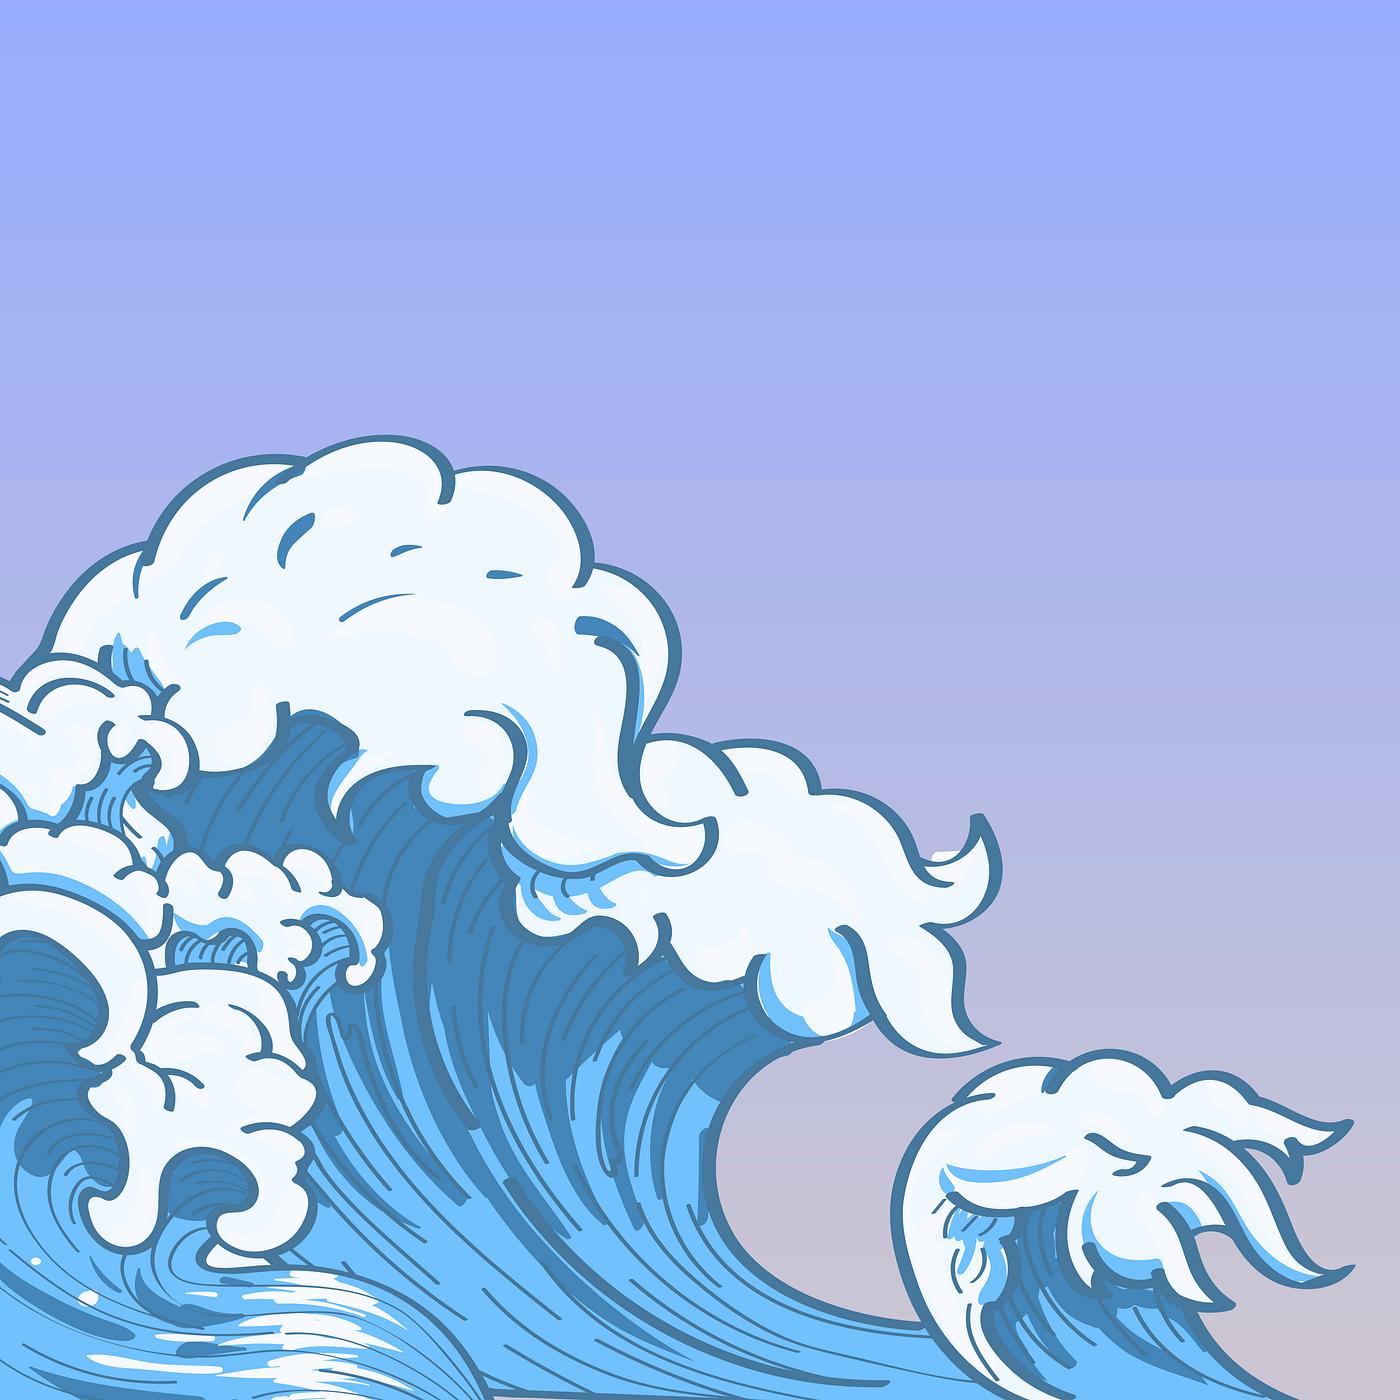 Japanese wave art doodle | Free vector - 843090